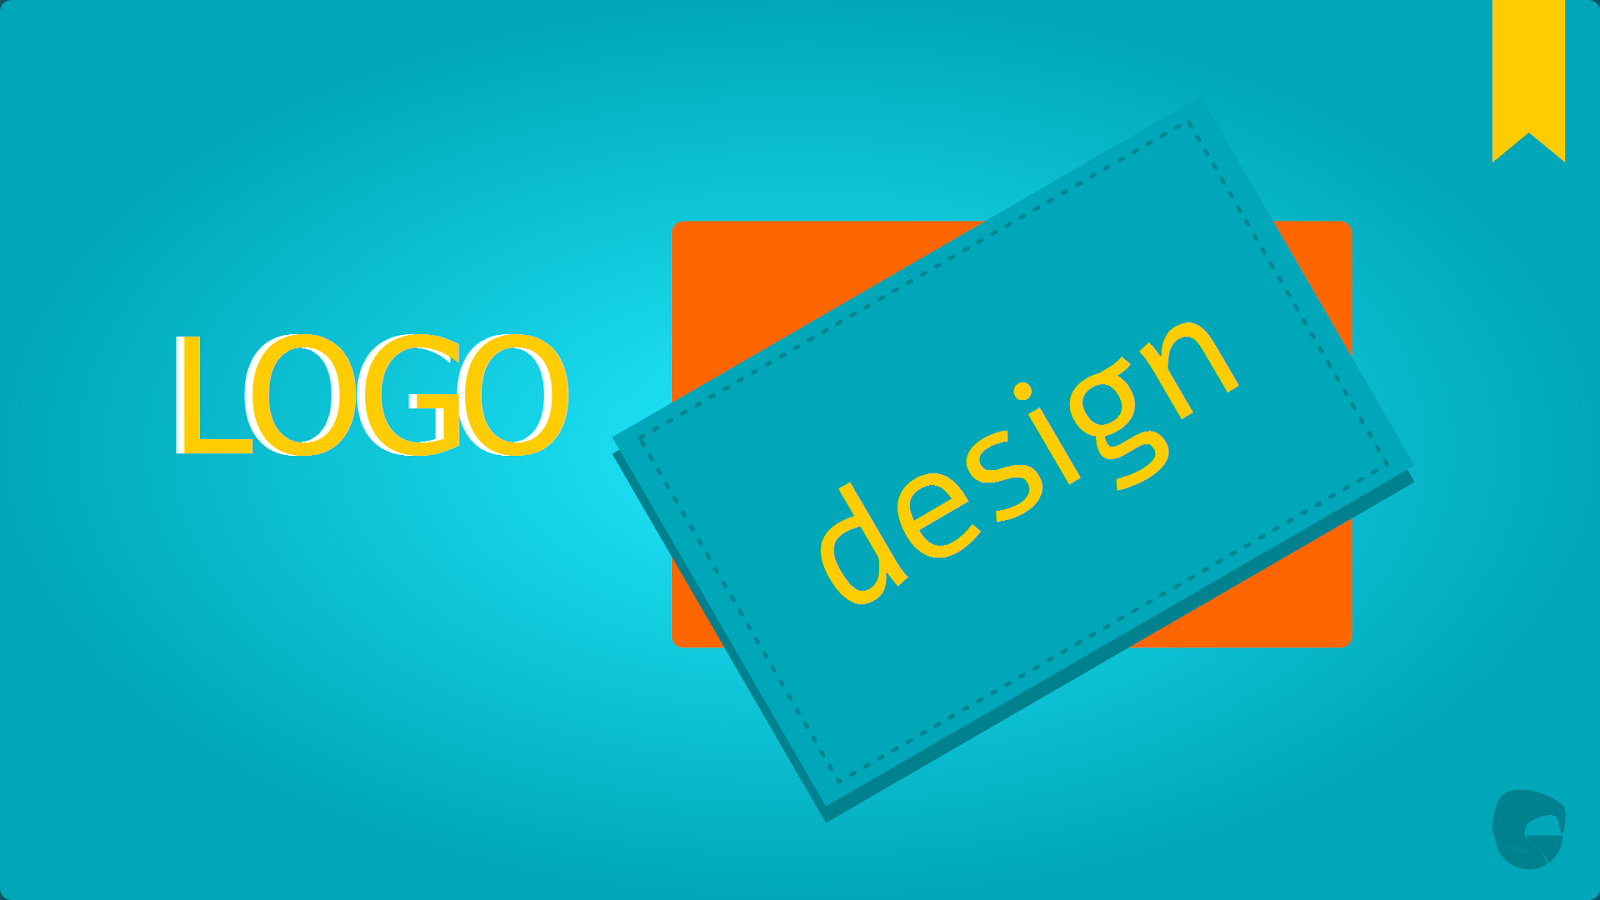 Professional logo creation services can provide you with a responsive logo design.